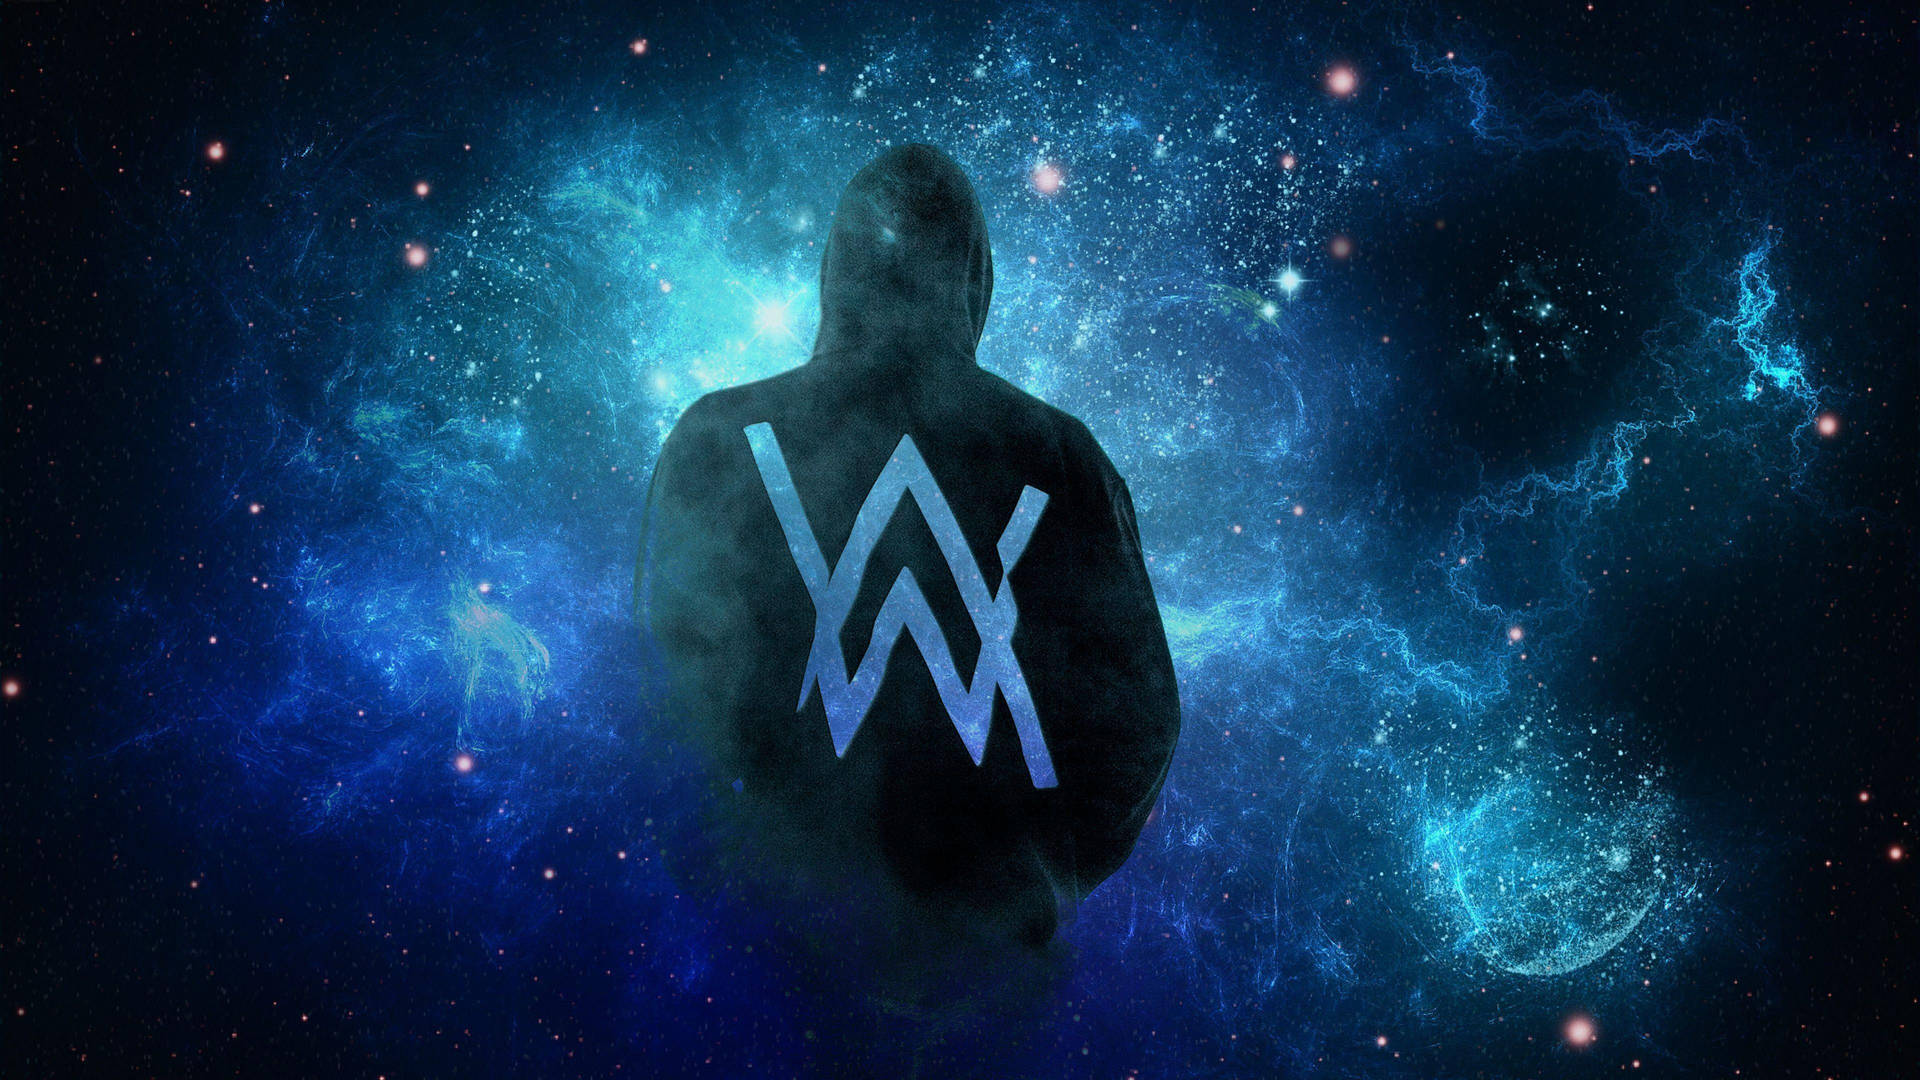 Internationally Acclaimed Musician, Alan Walker, Sporting His Signature Black Hoodie Background